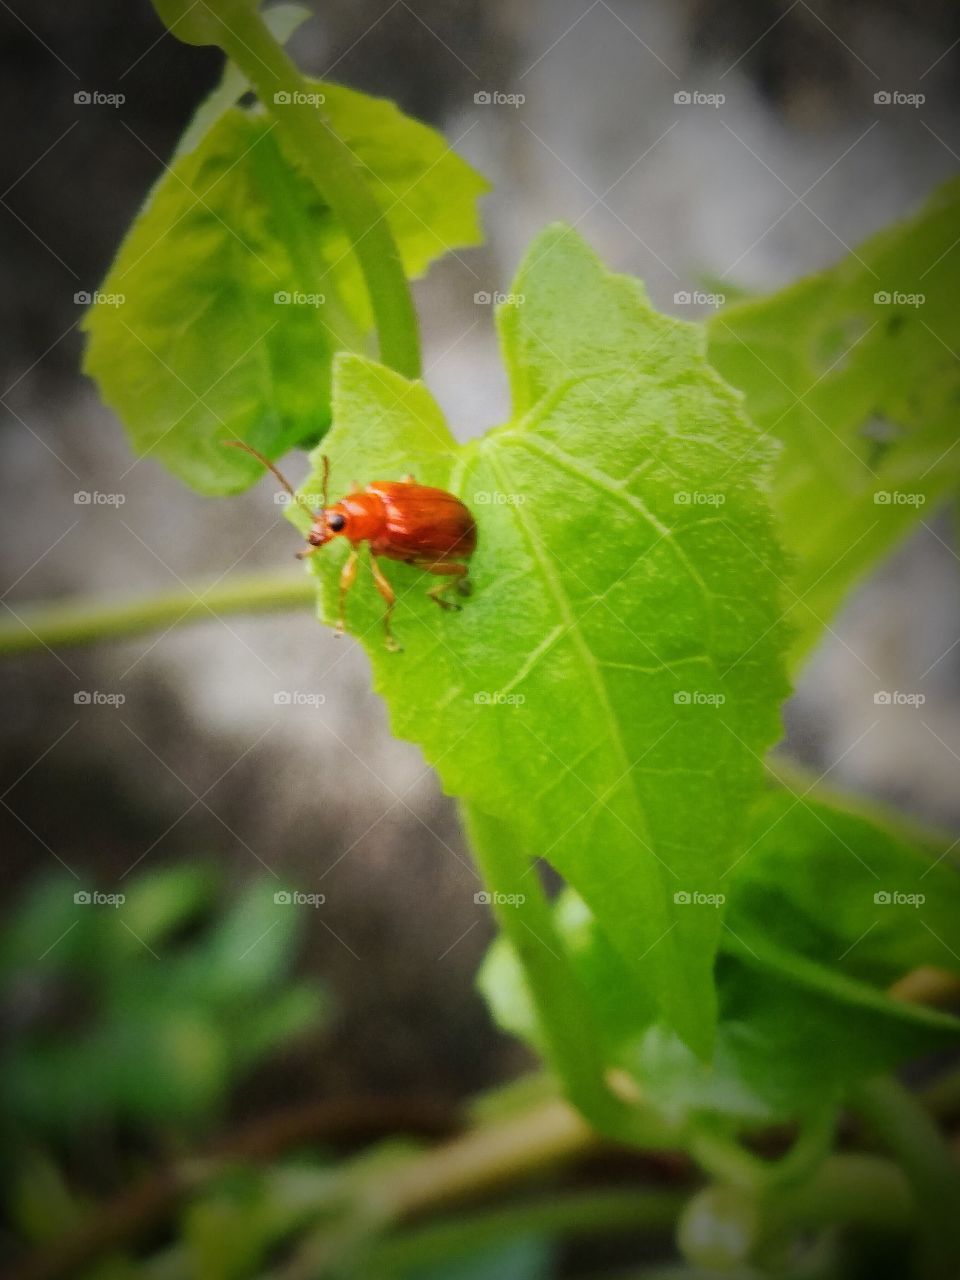 A Very Beautiful & Little Bug Animal With green Leaf.